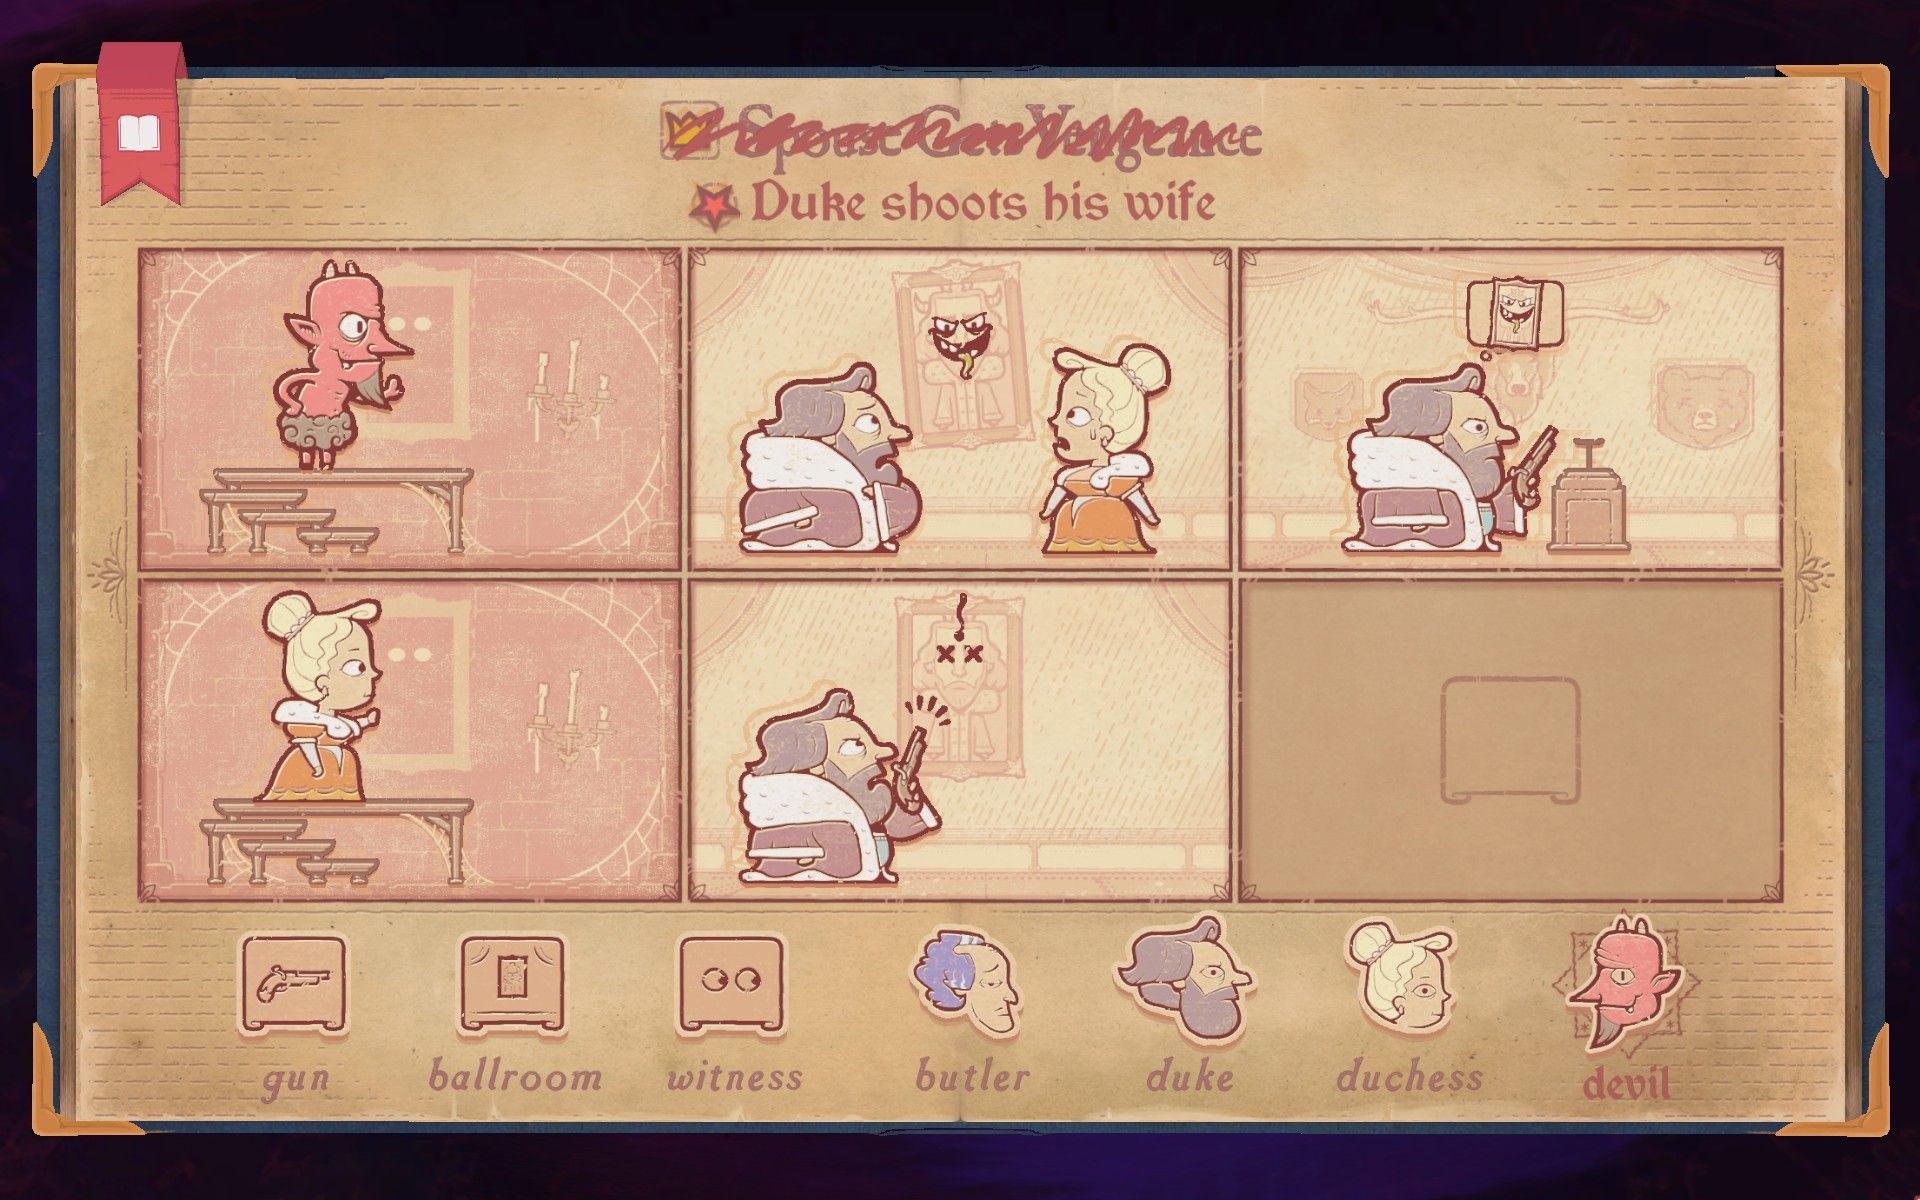 The solution to the devil section of Chapter 8 in Storyteller, showing the Duke shooting his wife.